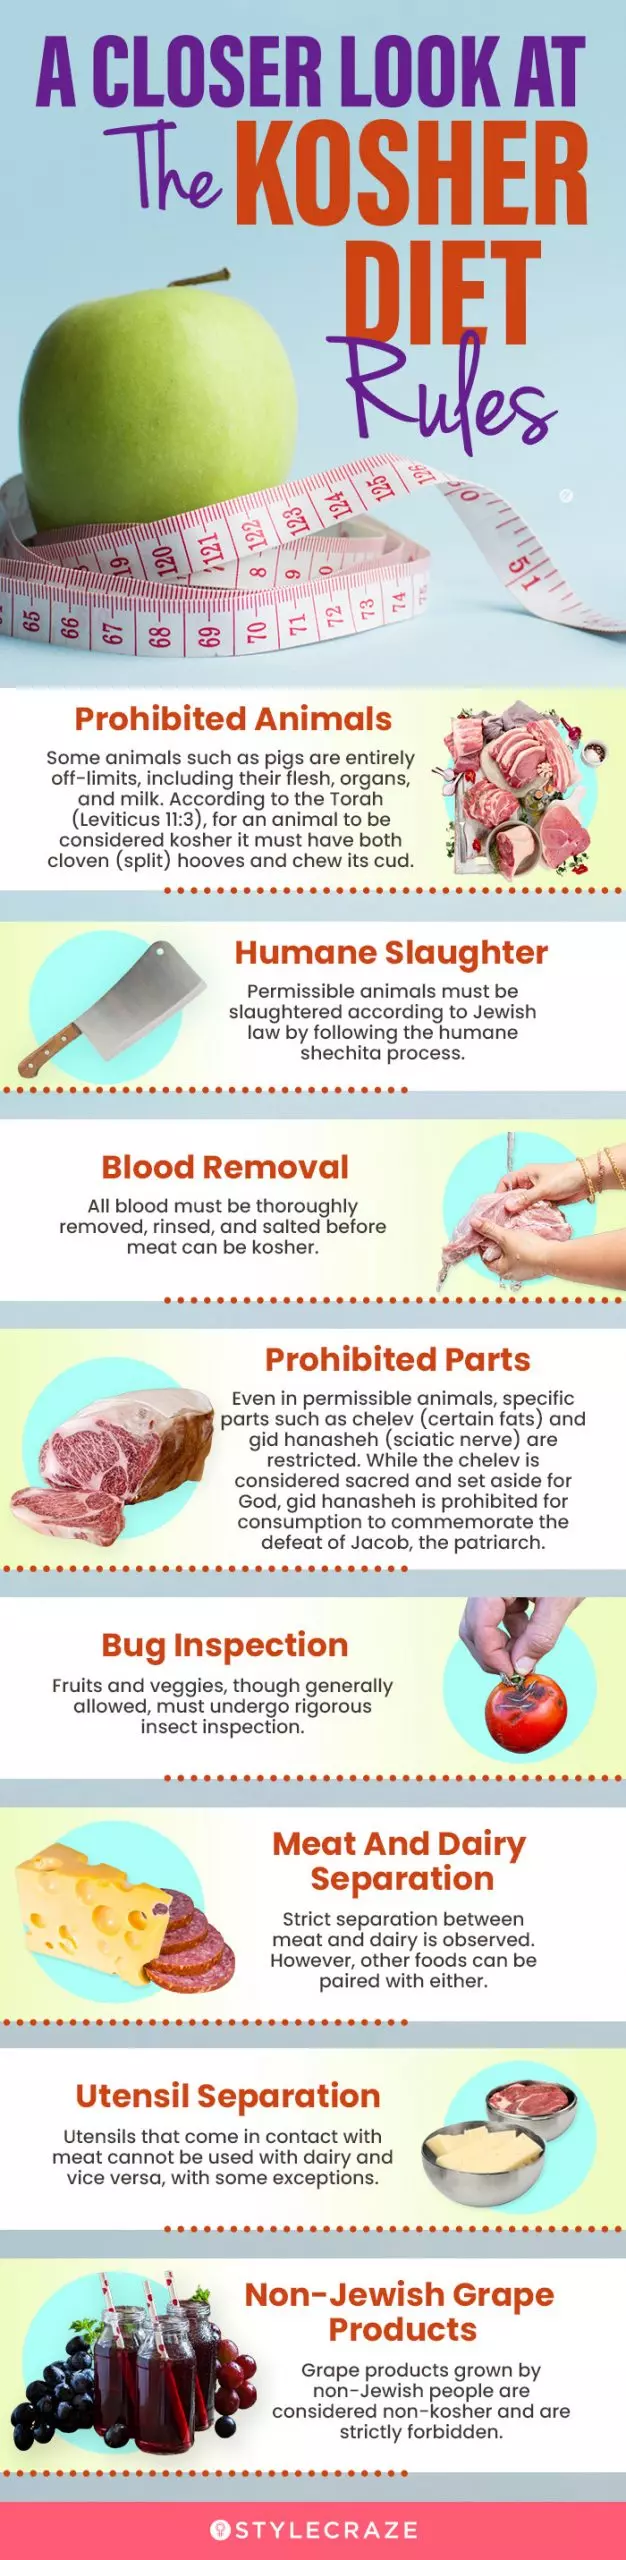 a closer look at the kosher diet rules (infographic)